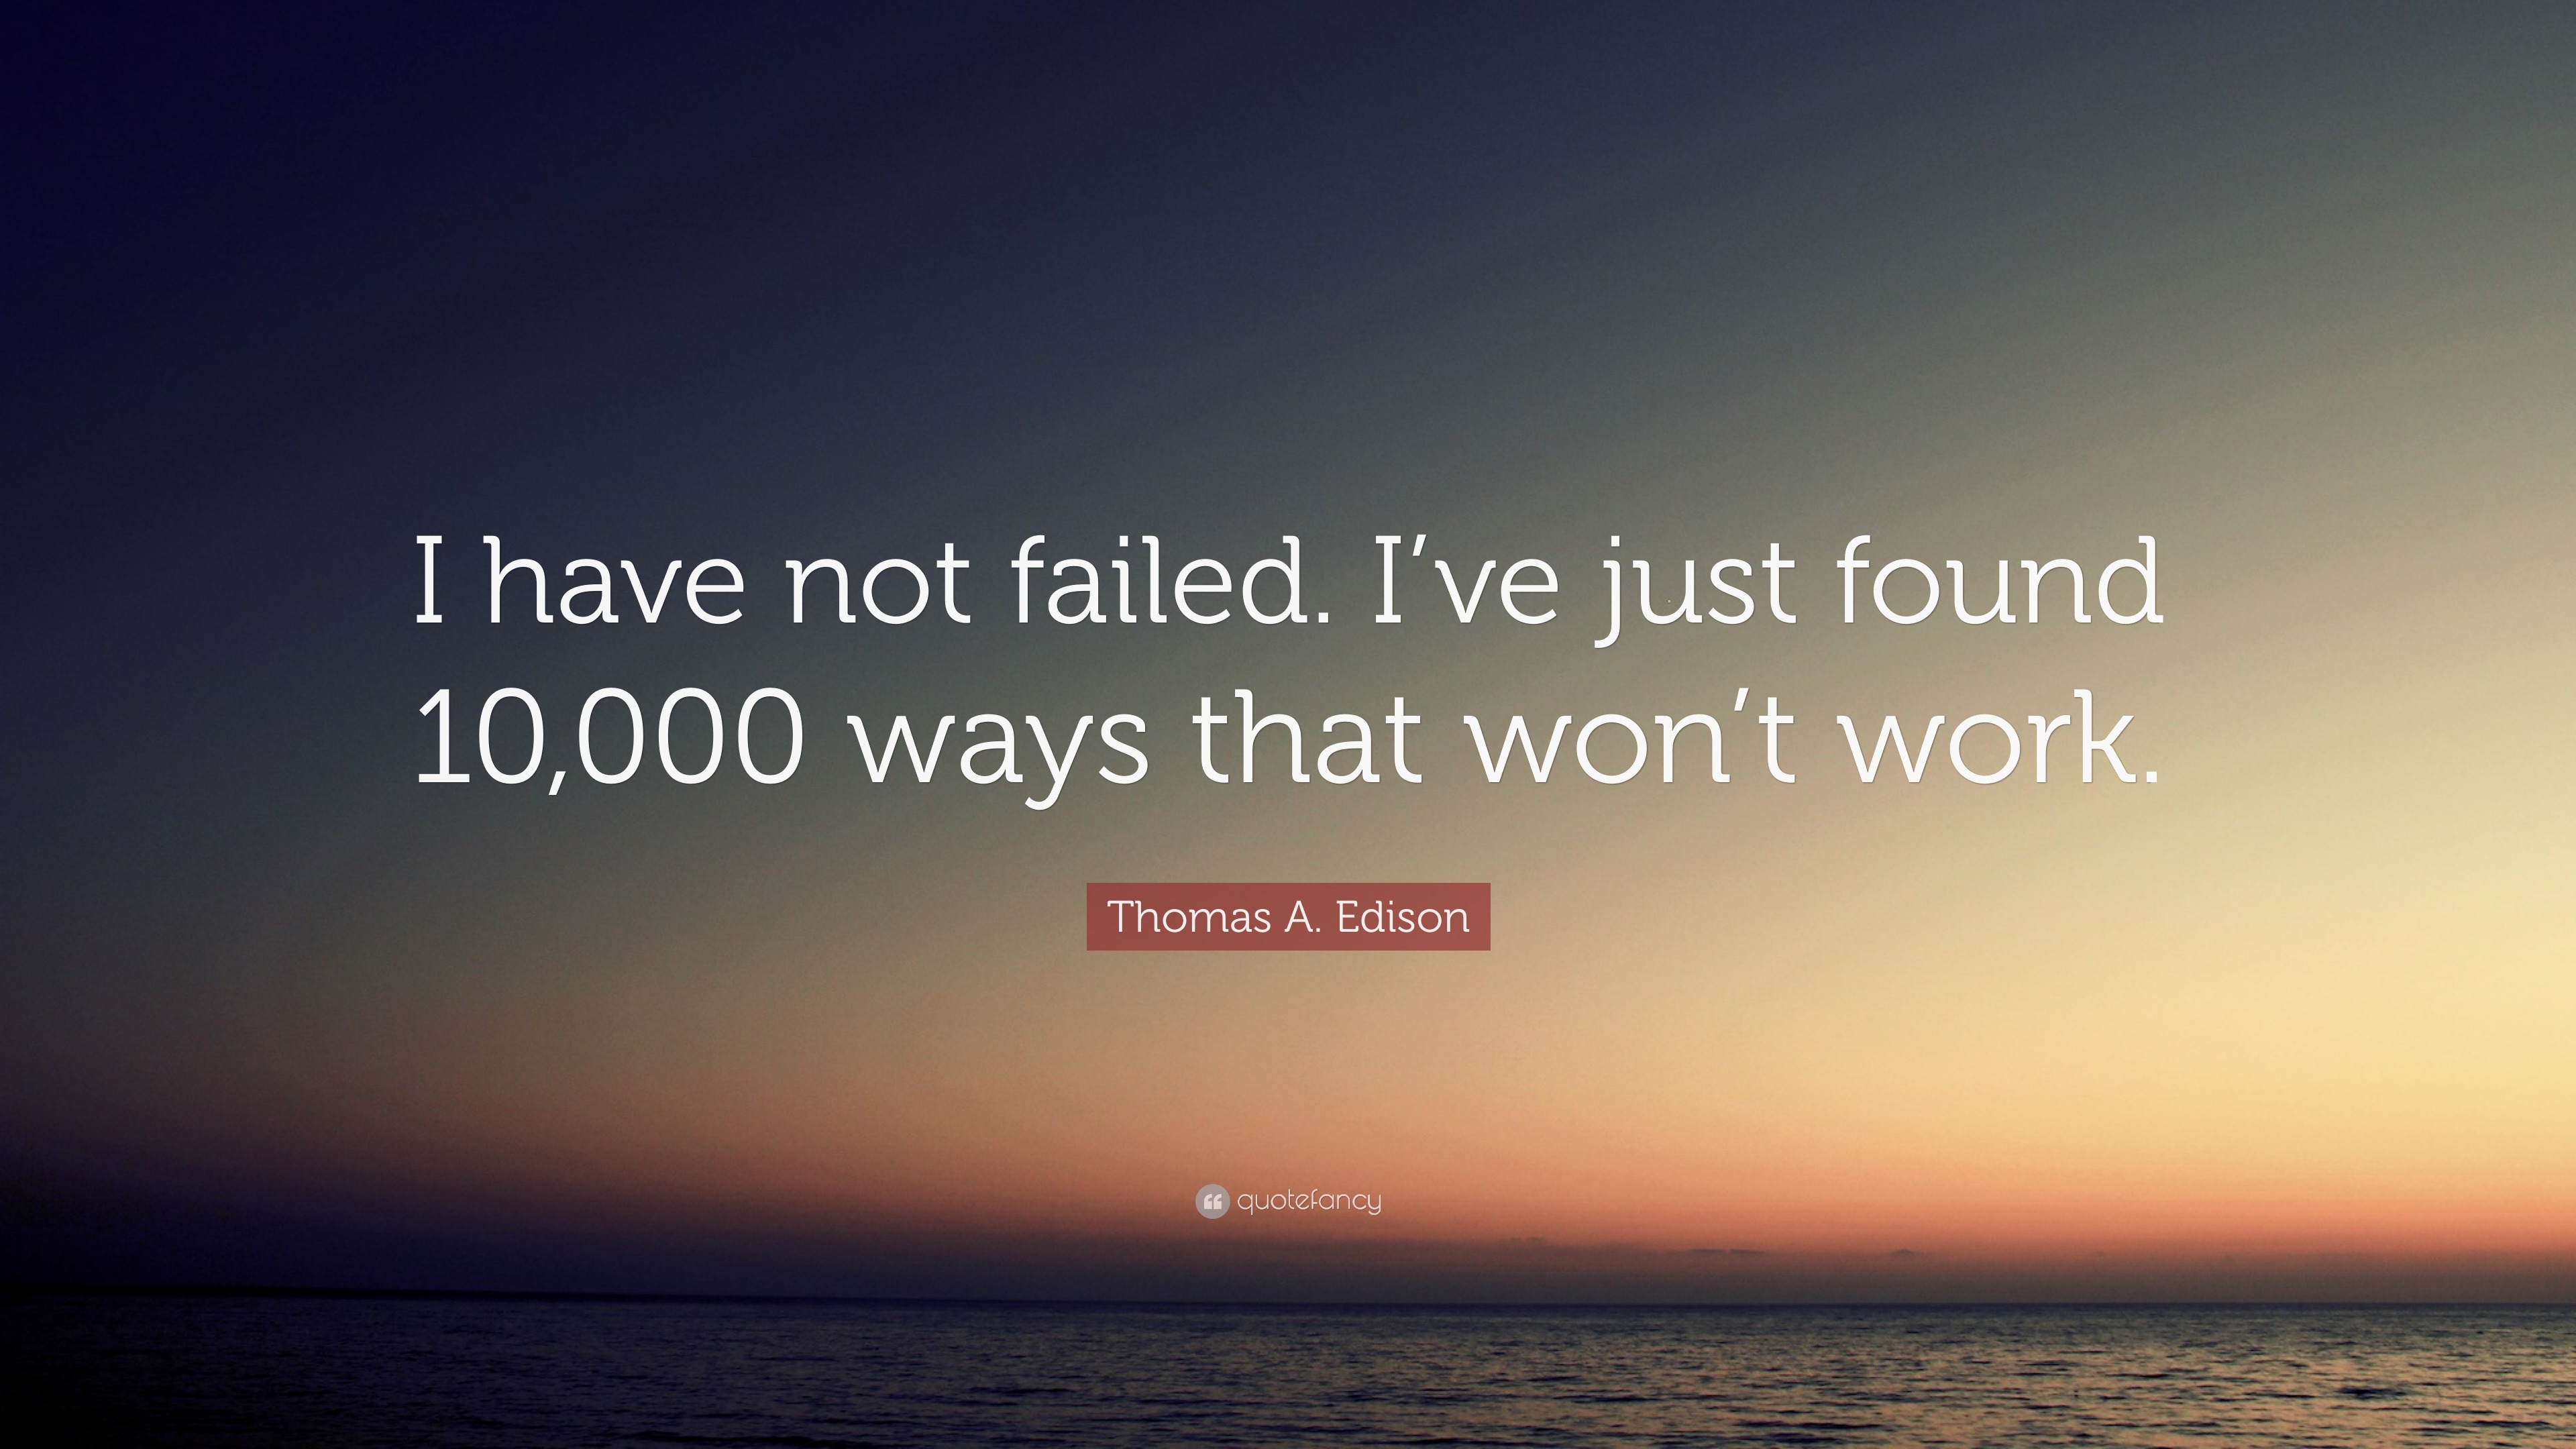 Thomas A. Edison Quote: “I have not failed. I’ve just found 10,000 ways ...